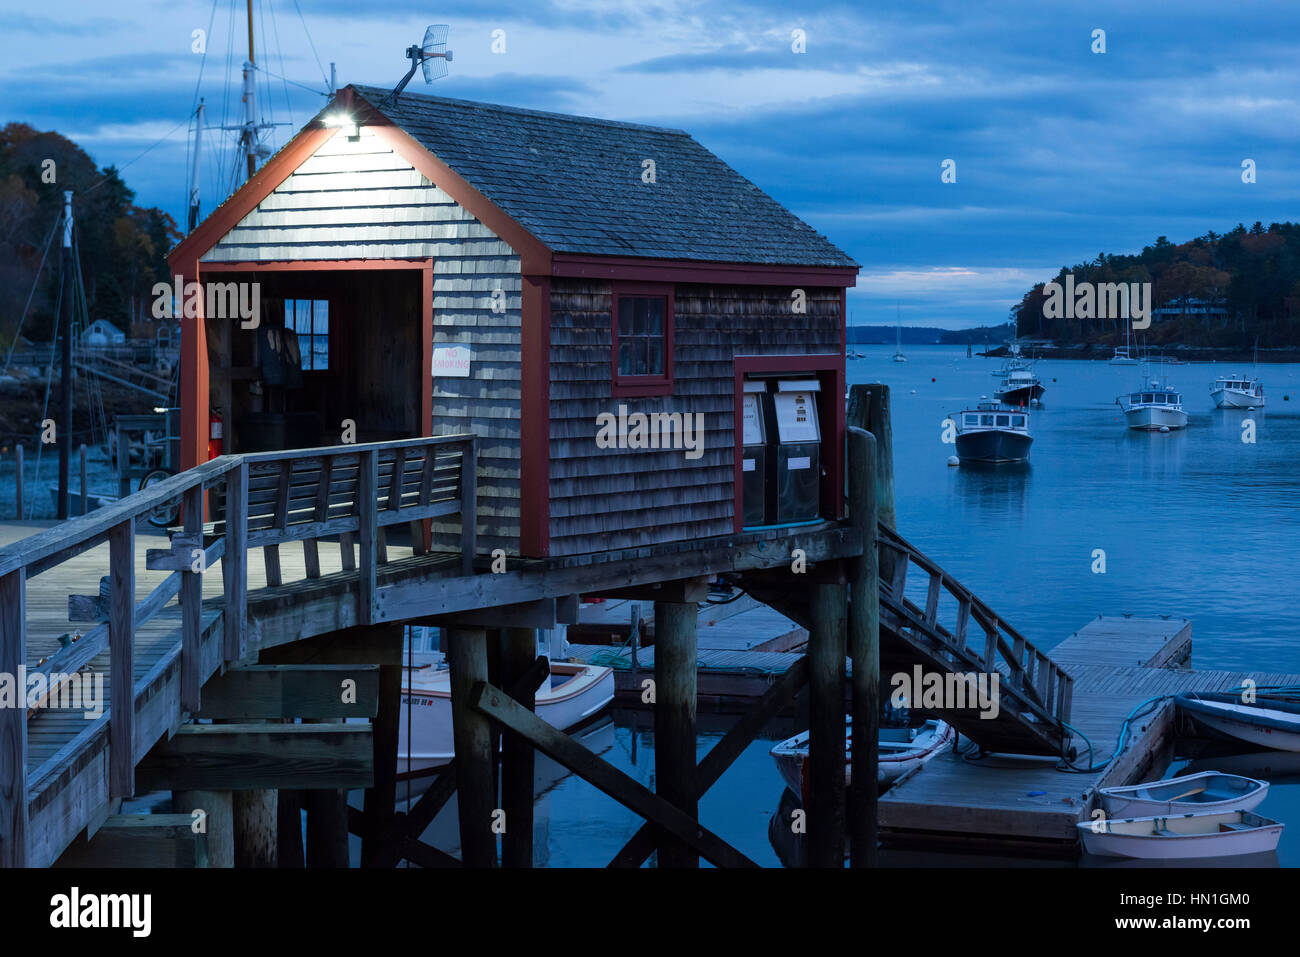 The Shack at the Entrance to the Dock at Rockport Marine, Maine, After Sunset Stock Photo